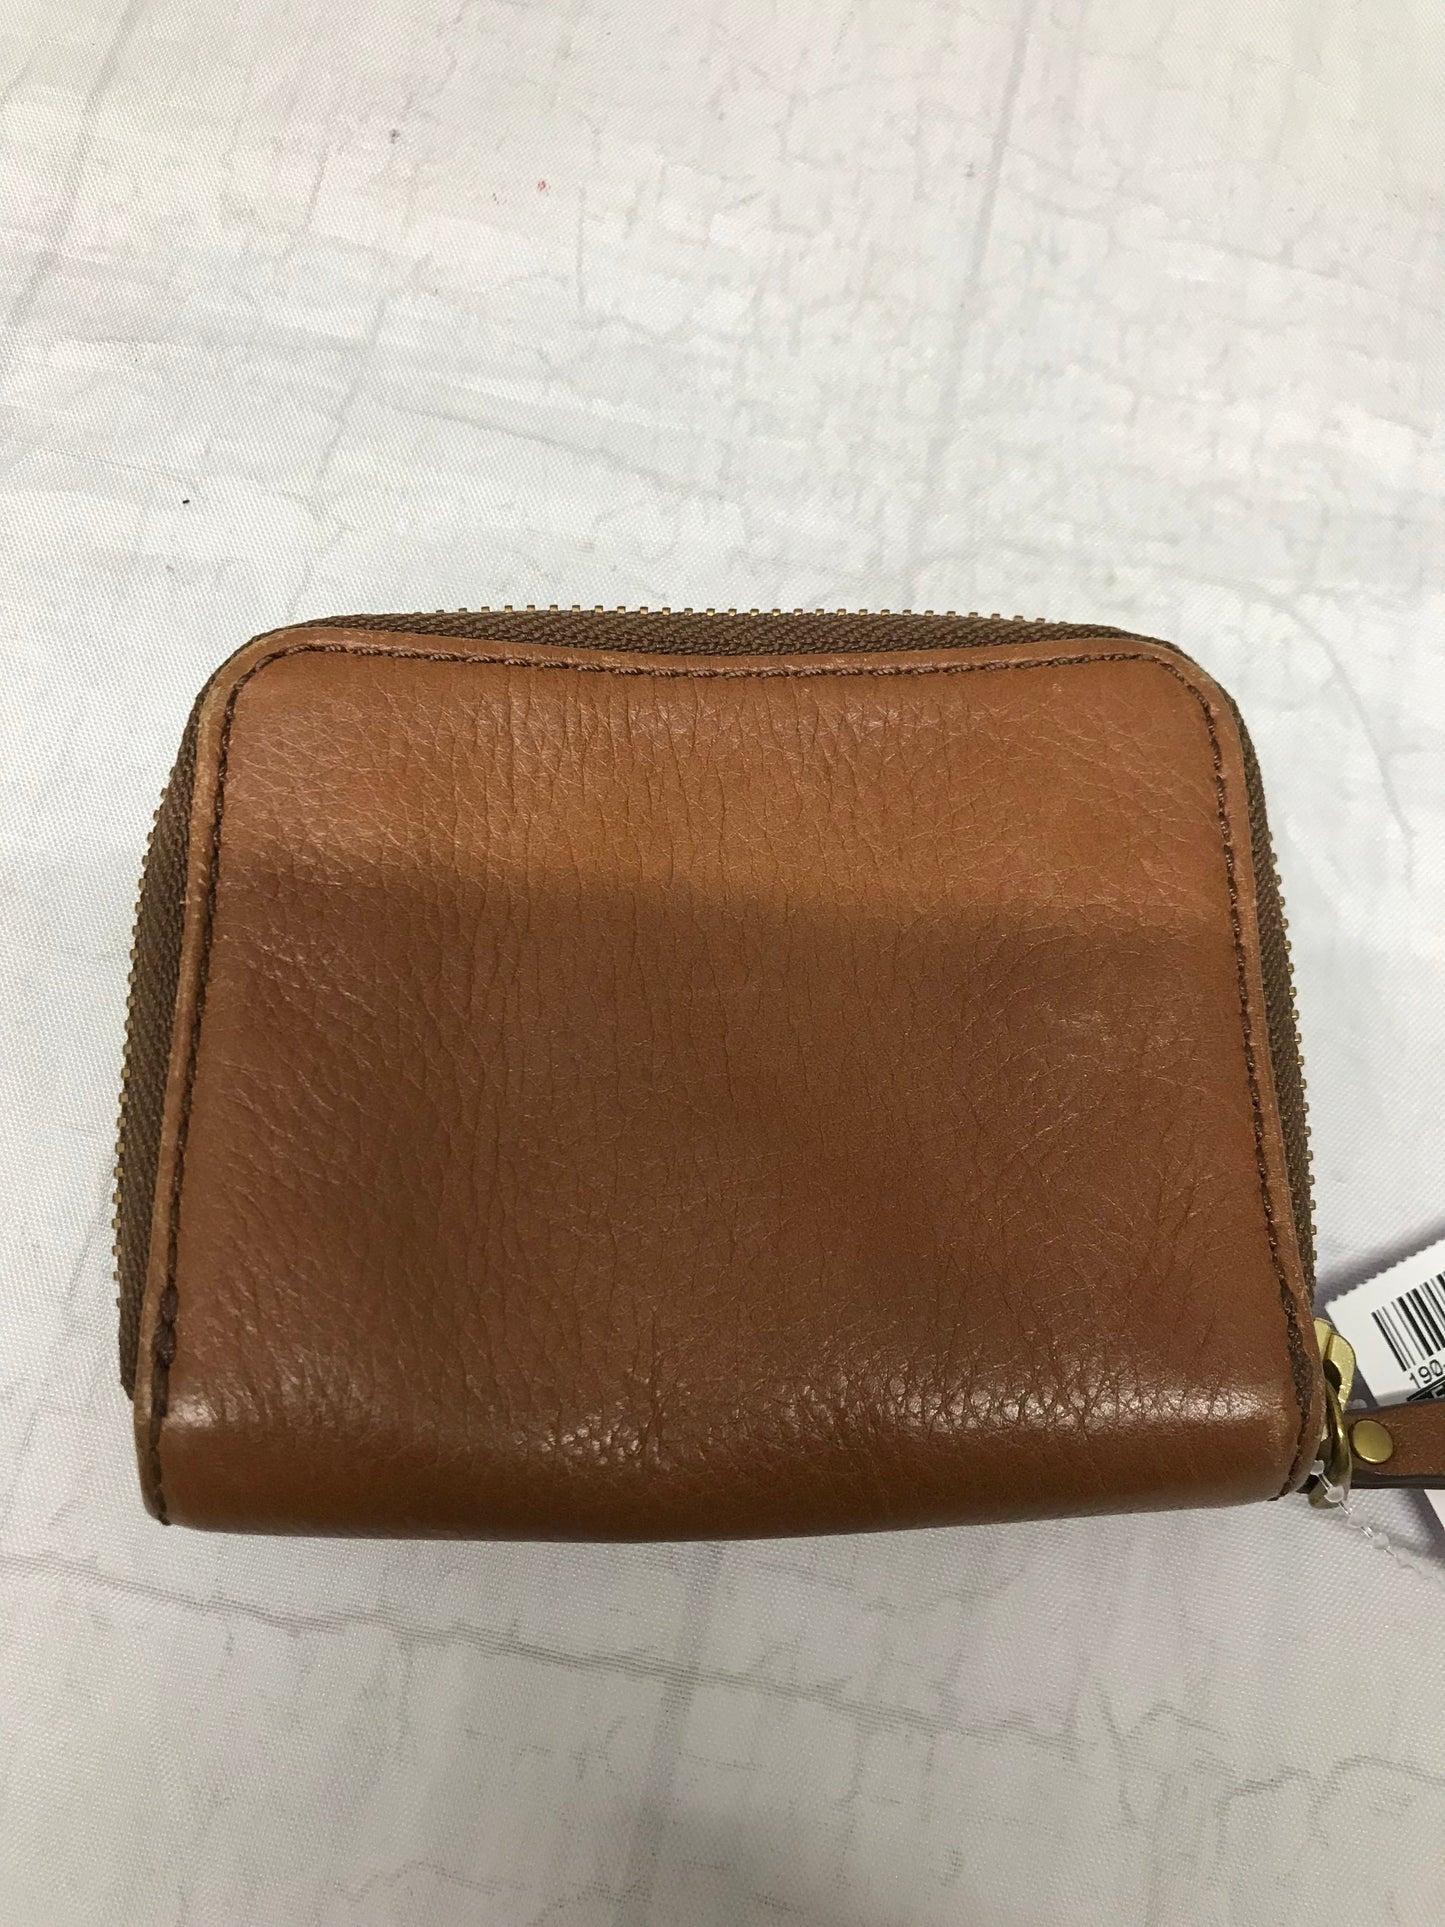 Wallet By Fossil, Size: Small